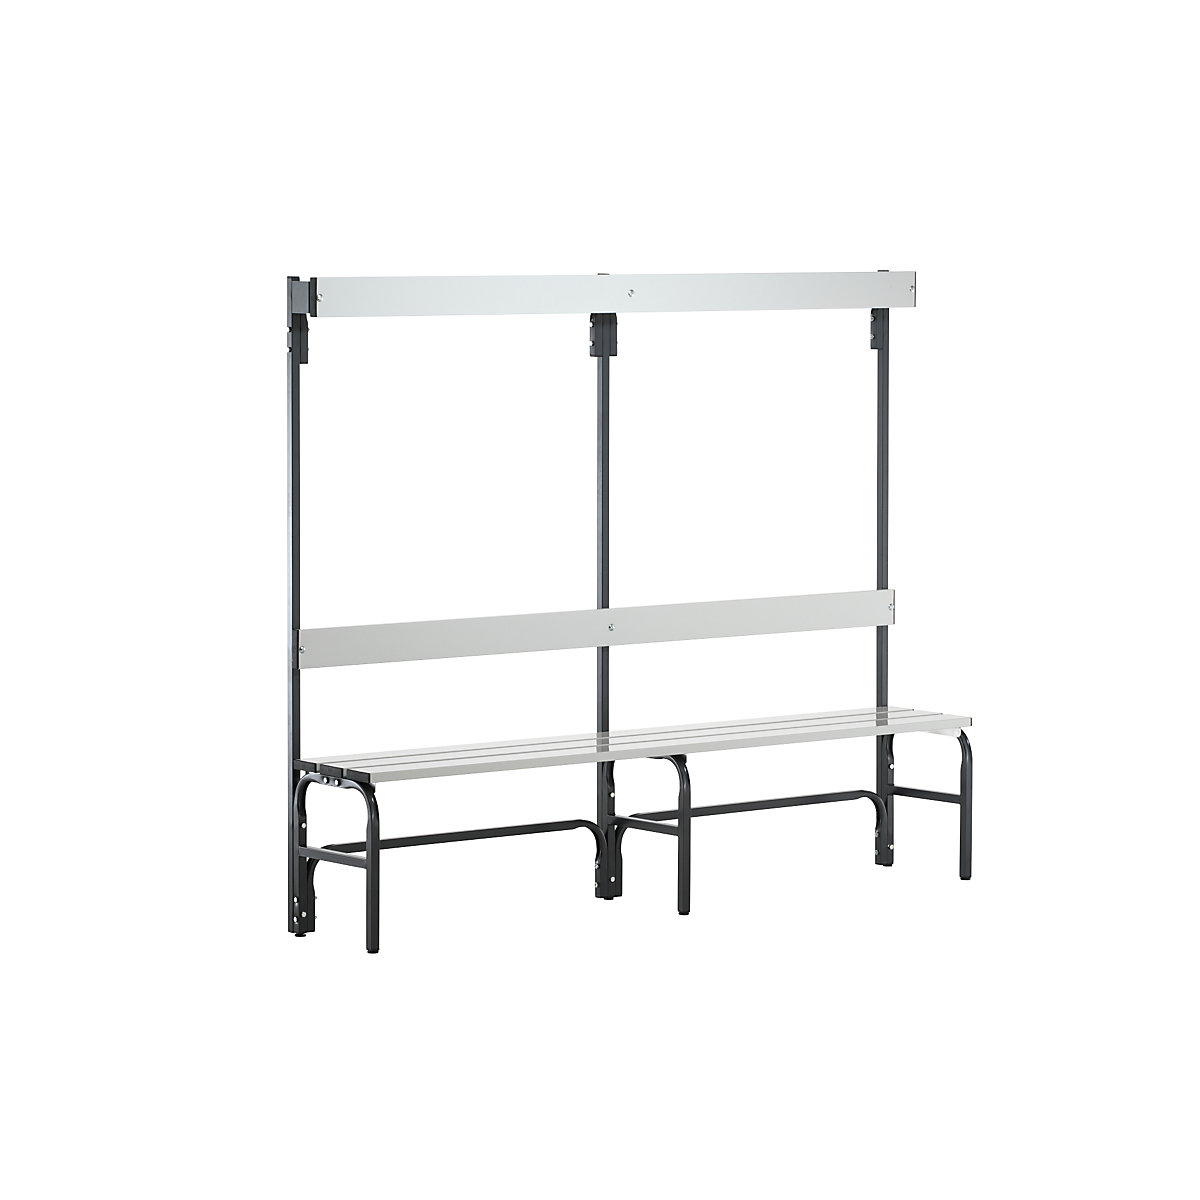 Sypro – Changing room bench made of stainless steel, HxD 1650 x 375 mm, length 1500 mm, 6 hooks, charcoal